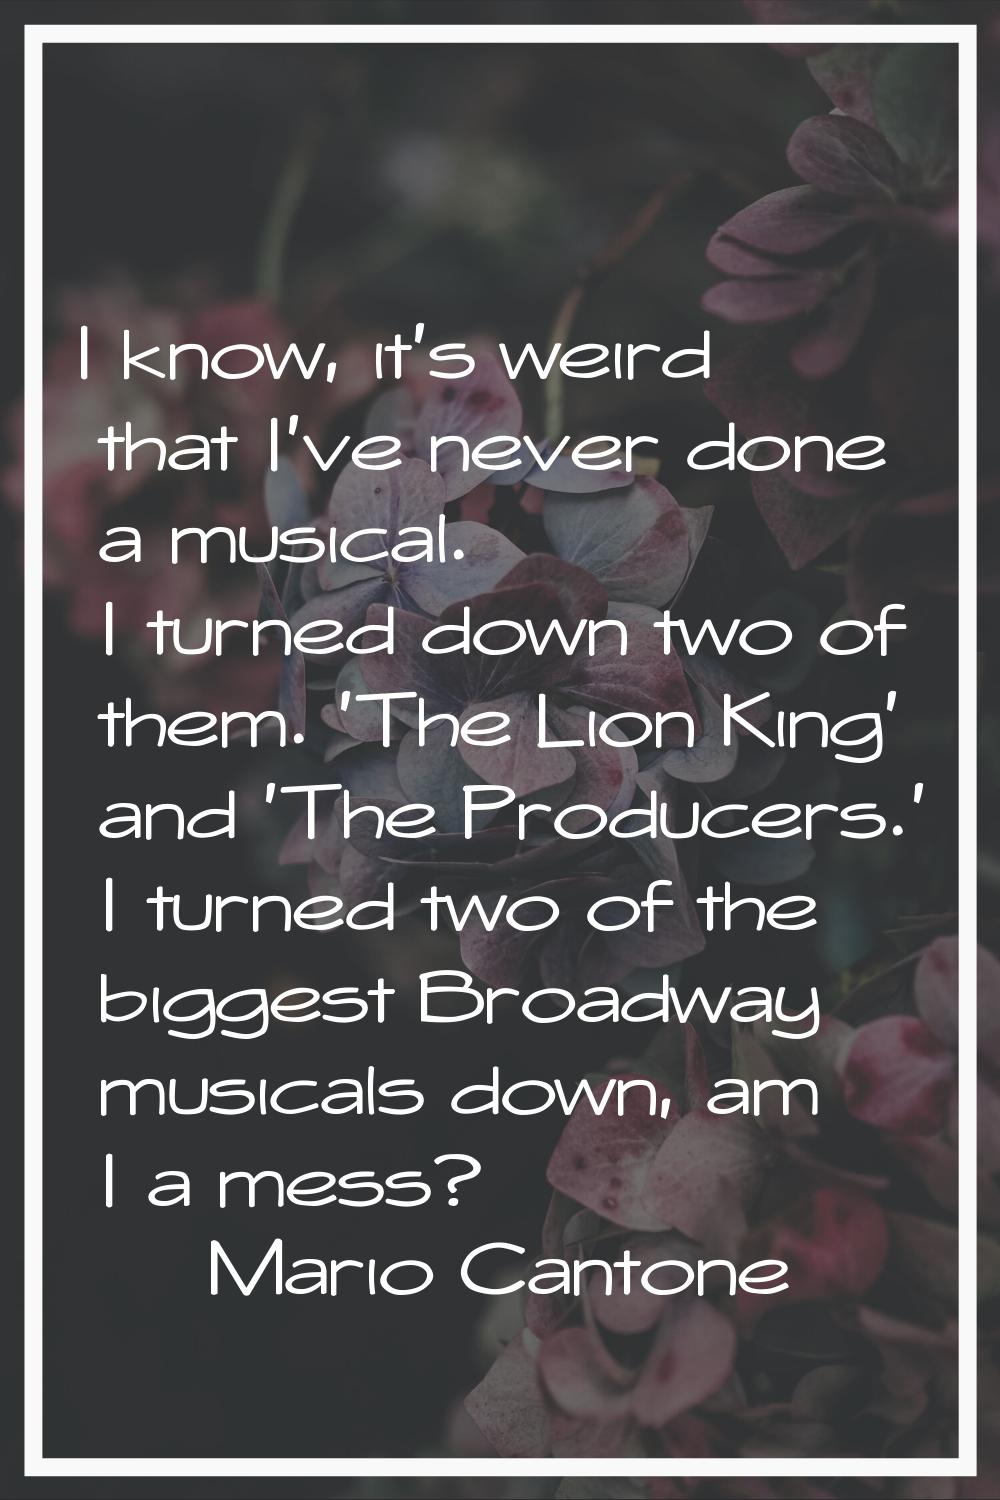 I know, it's weird that I've never done a musical. I turned down two of them. 'The Lion King' and '